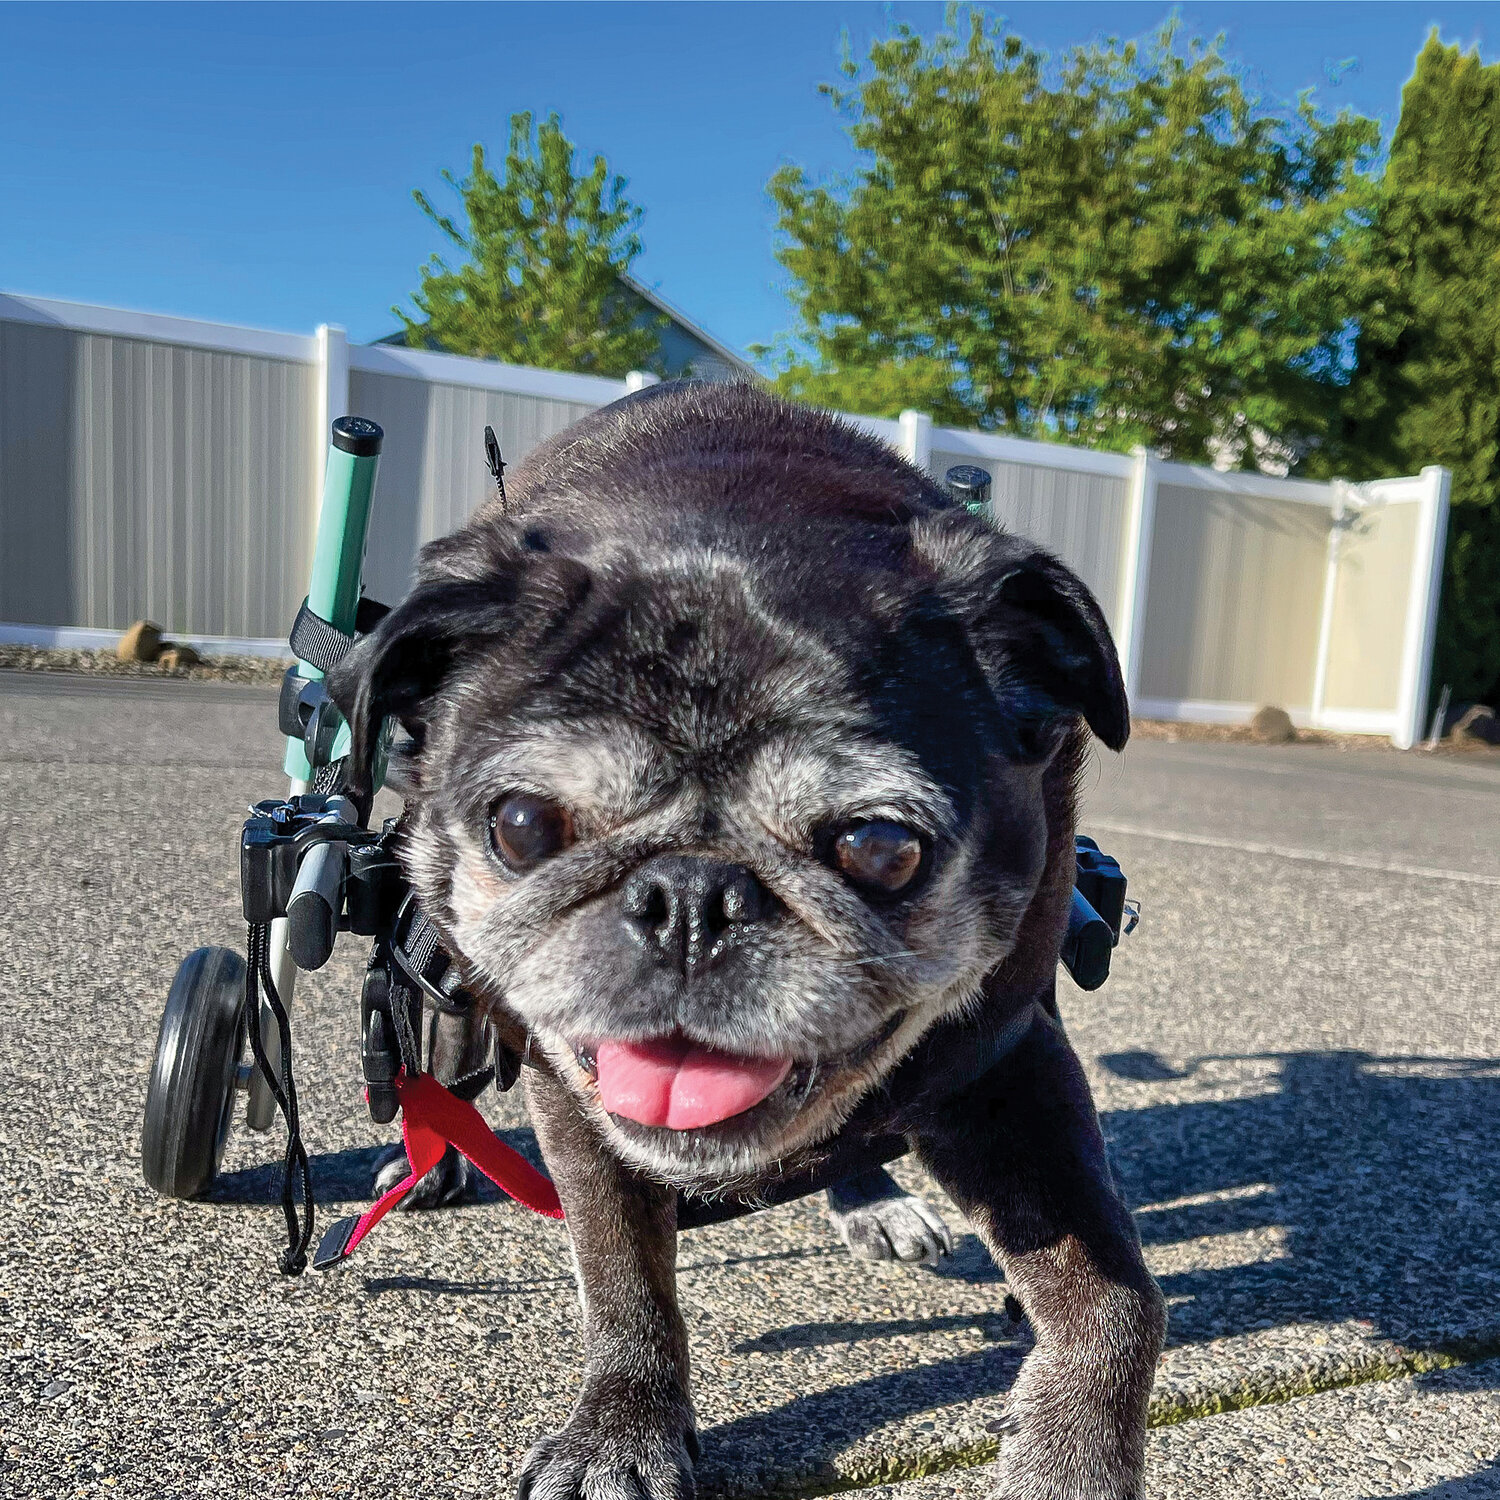 Charlie the pug, owned by Desireé Lorentz, enjoys using his wheelchair, provided by the Church of Pug